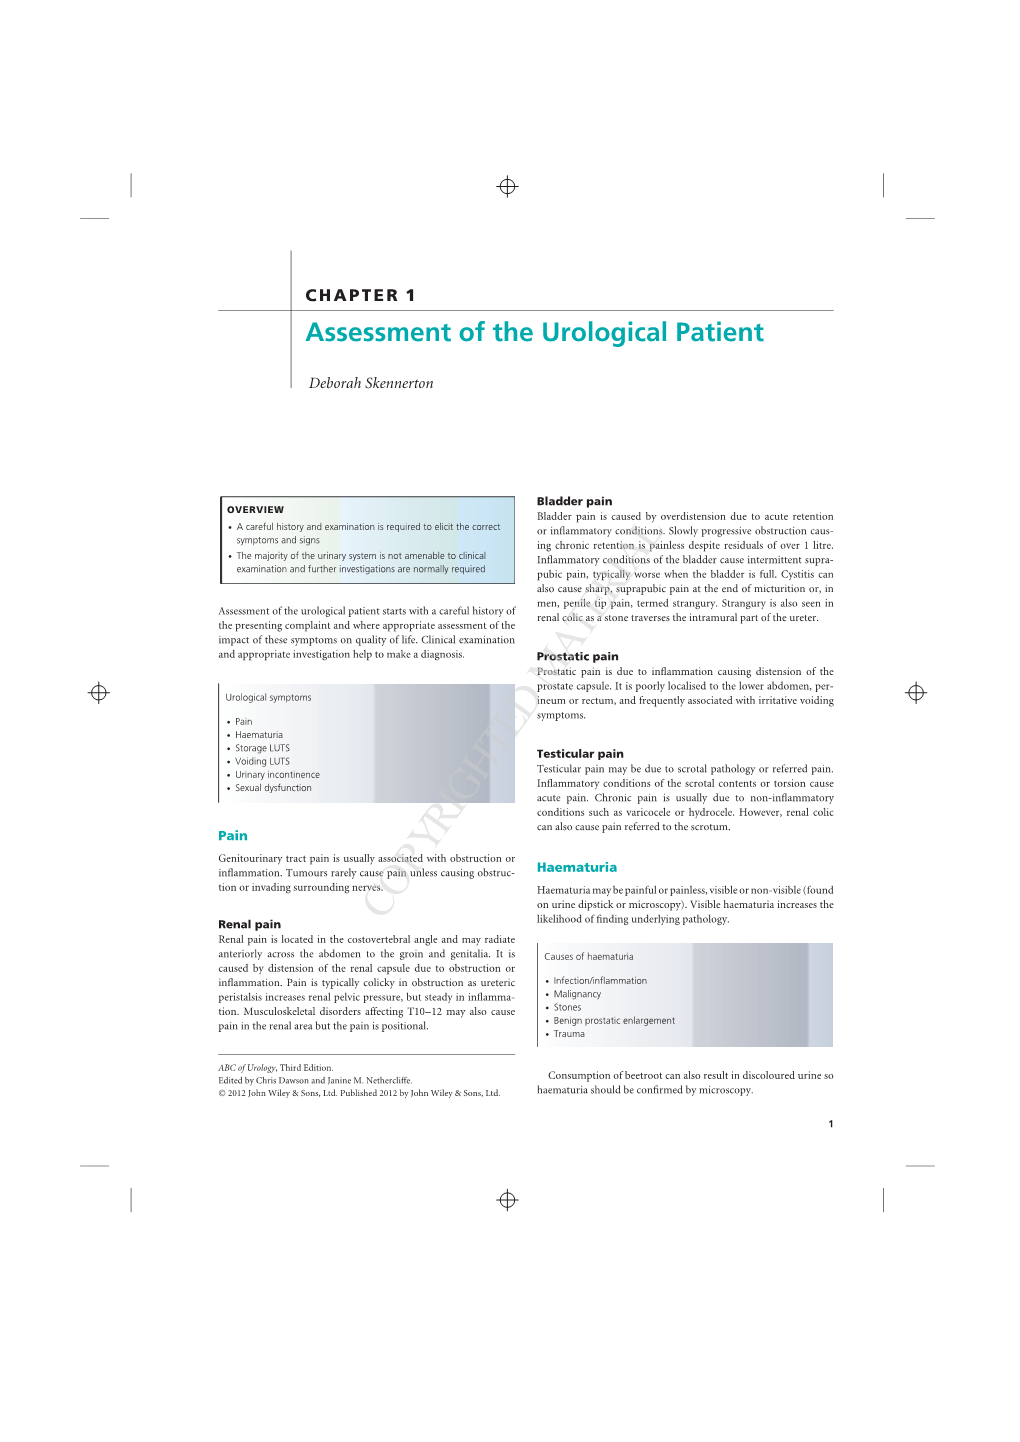 Assessment of the Urological Patient